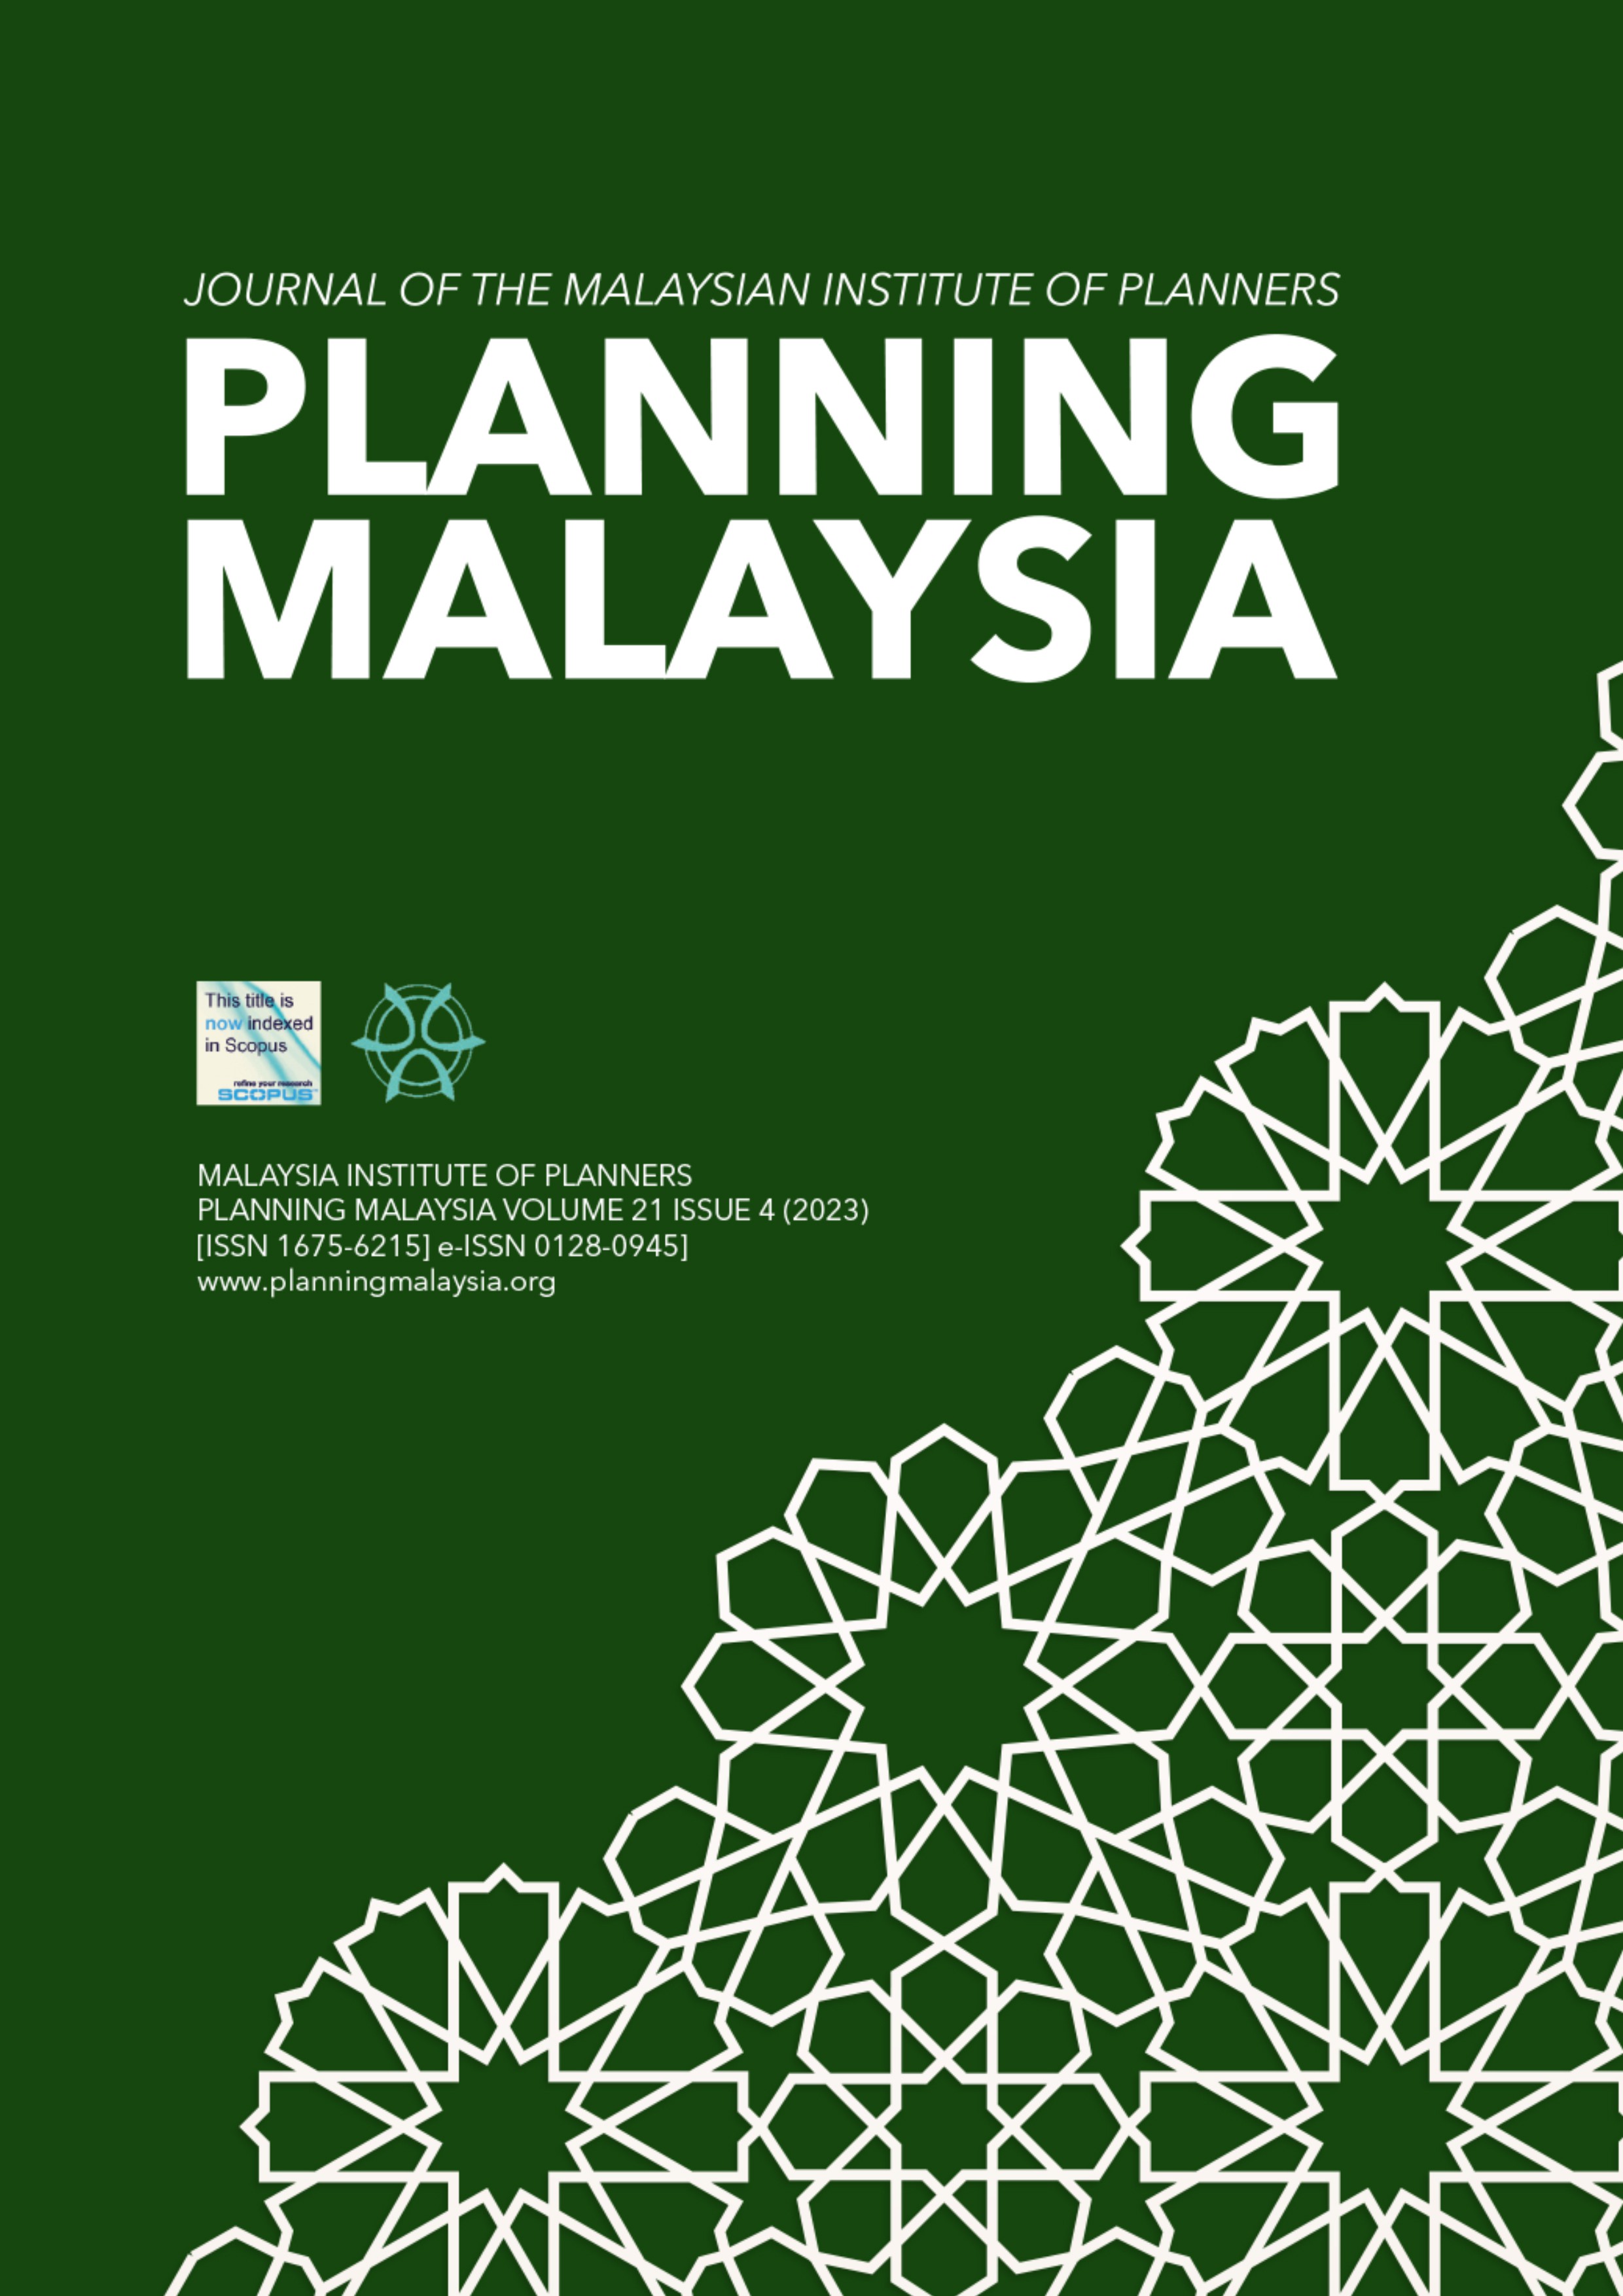 					View Vol. 21 (2023): PLANNING MALAYSIA JOURNAL : Volume 21, Issue 4, 2023
				